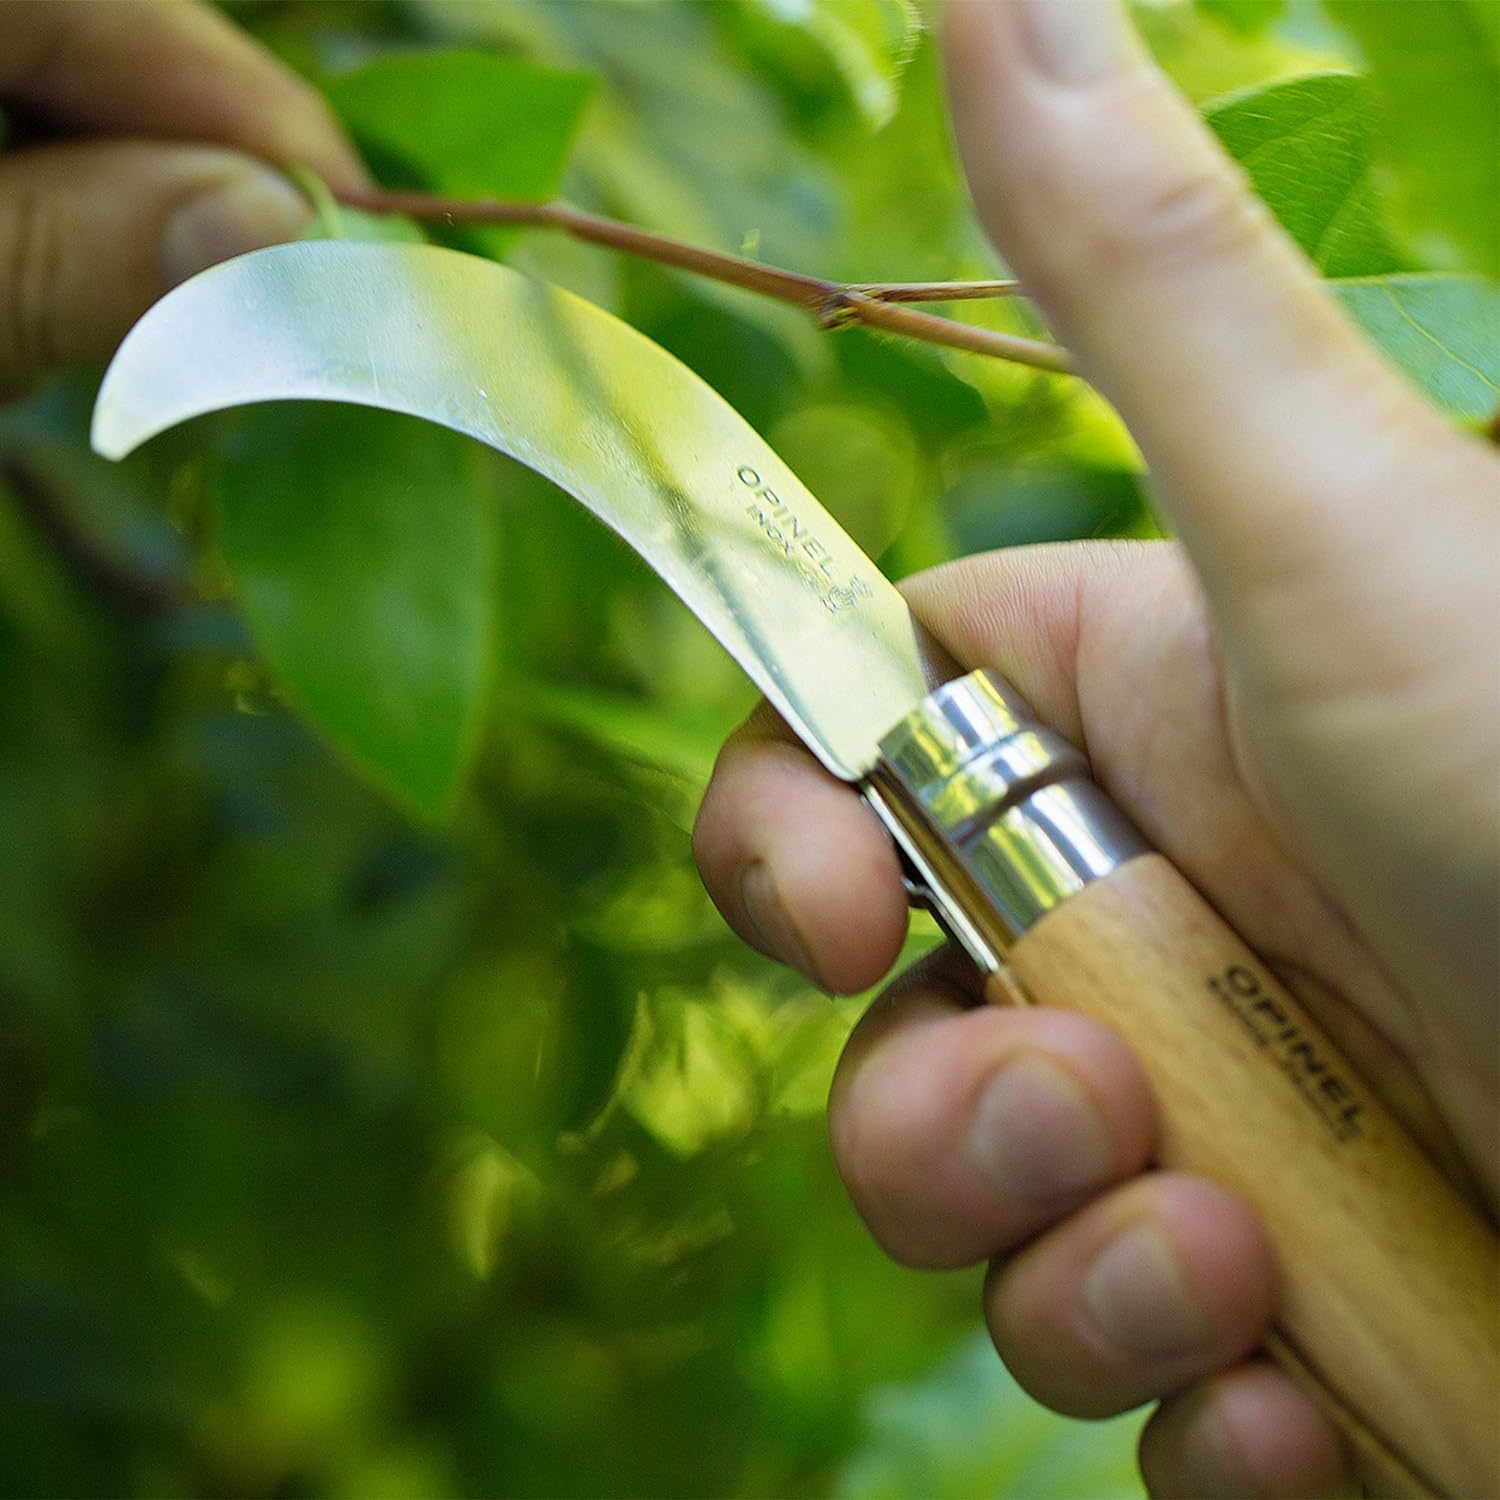 Which Kinds of Knives Are Best for Working in a Garden?